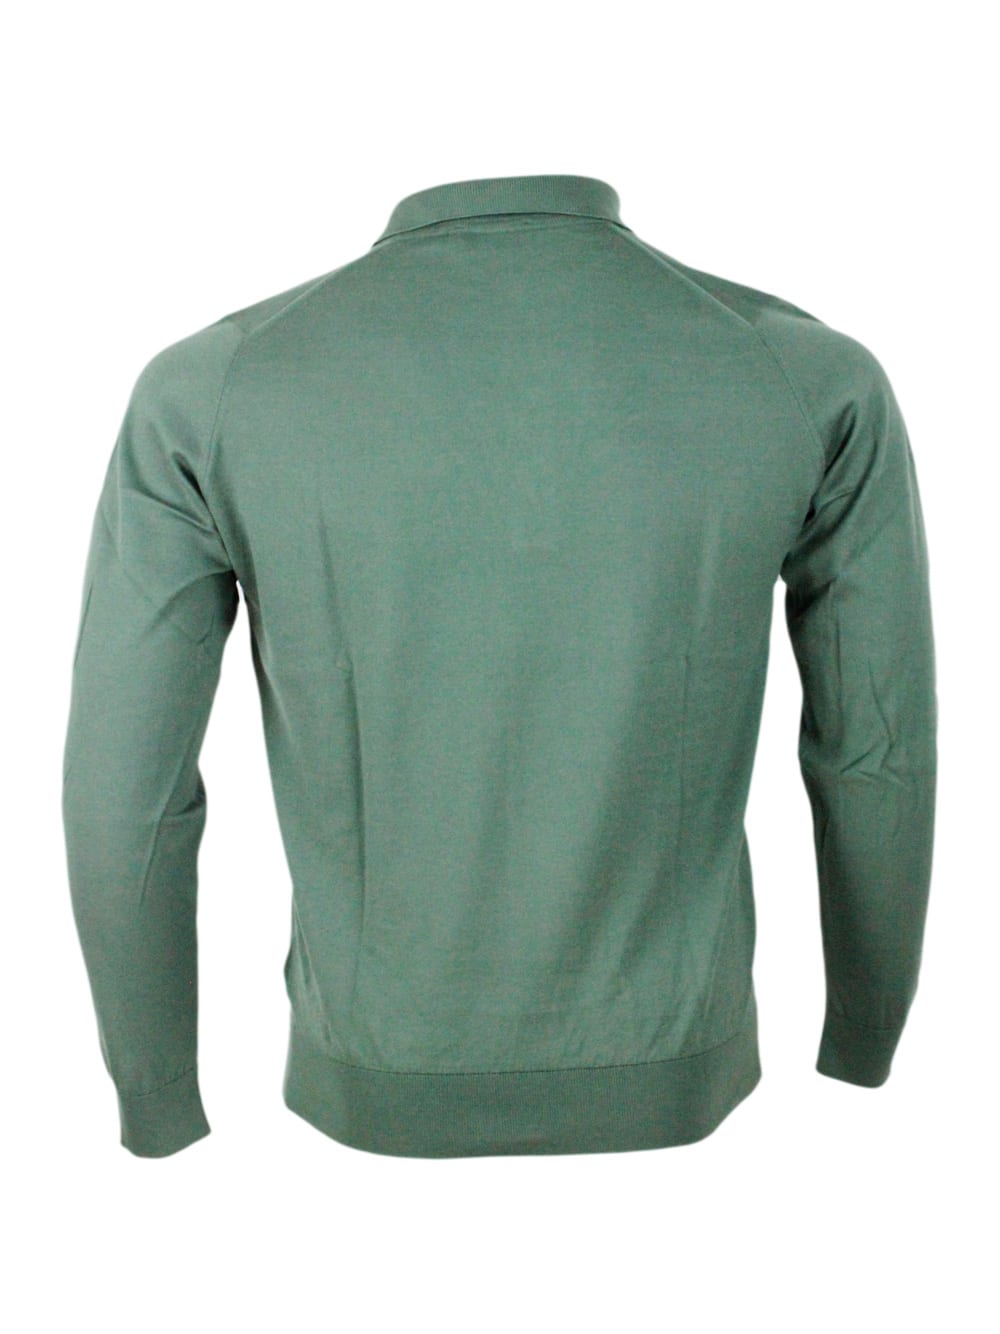 Shop John Smedley Long-sleeved Polo Shirt In Extrafine Cotton Thread With Three Buttons In Green